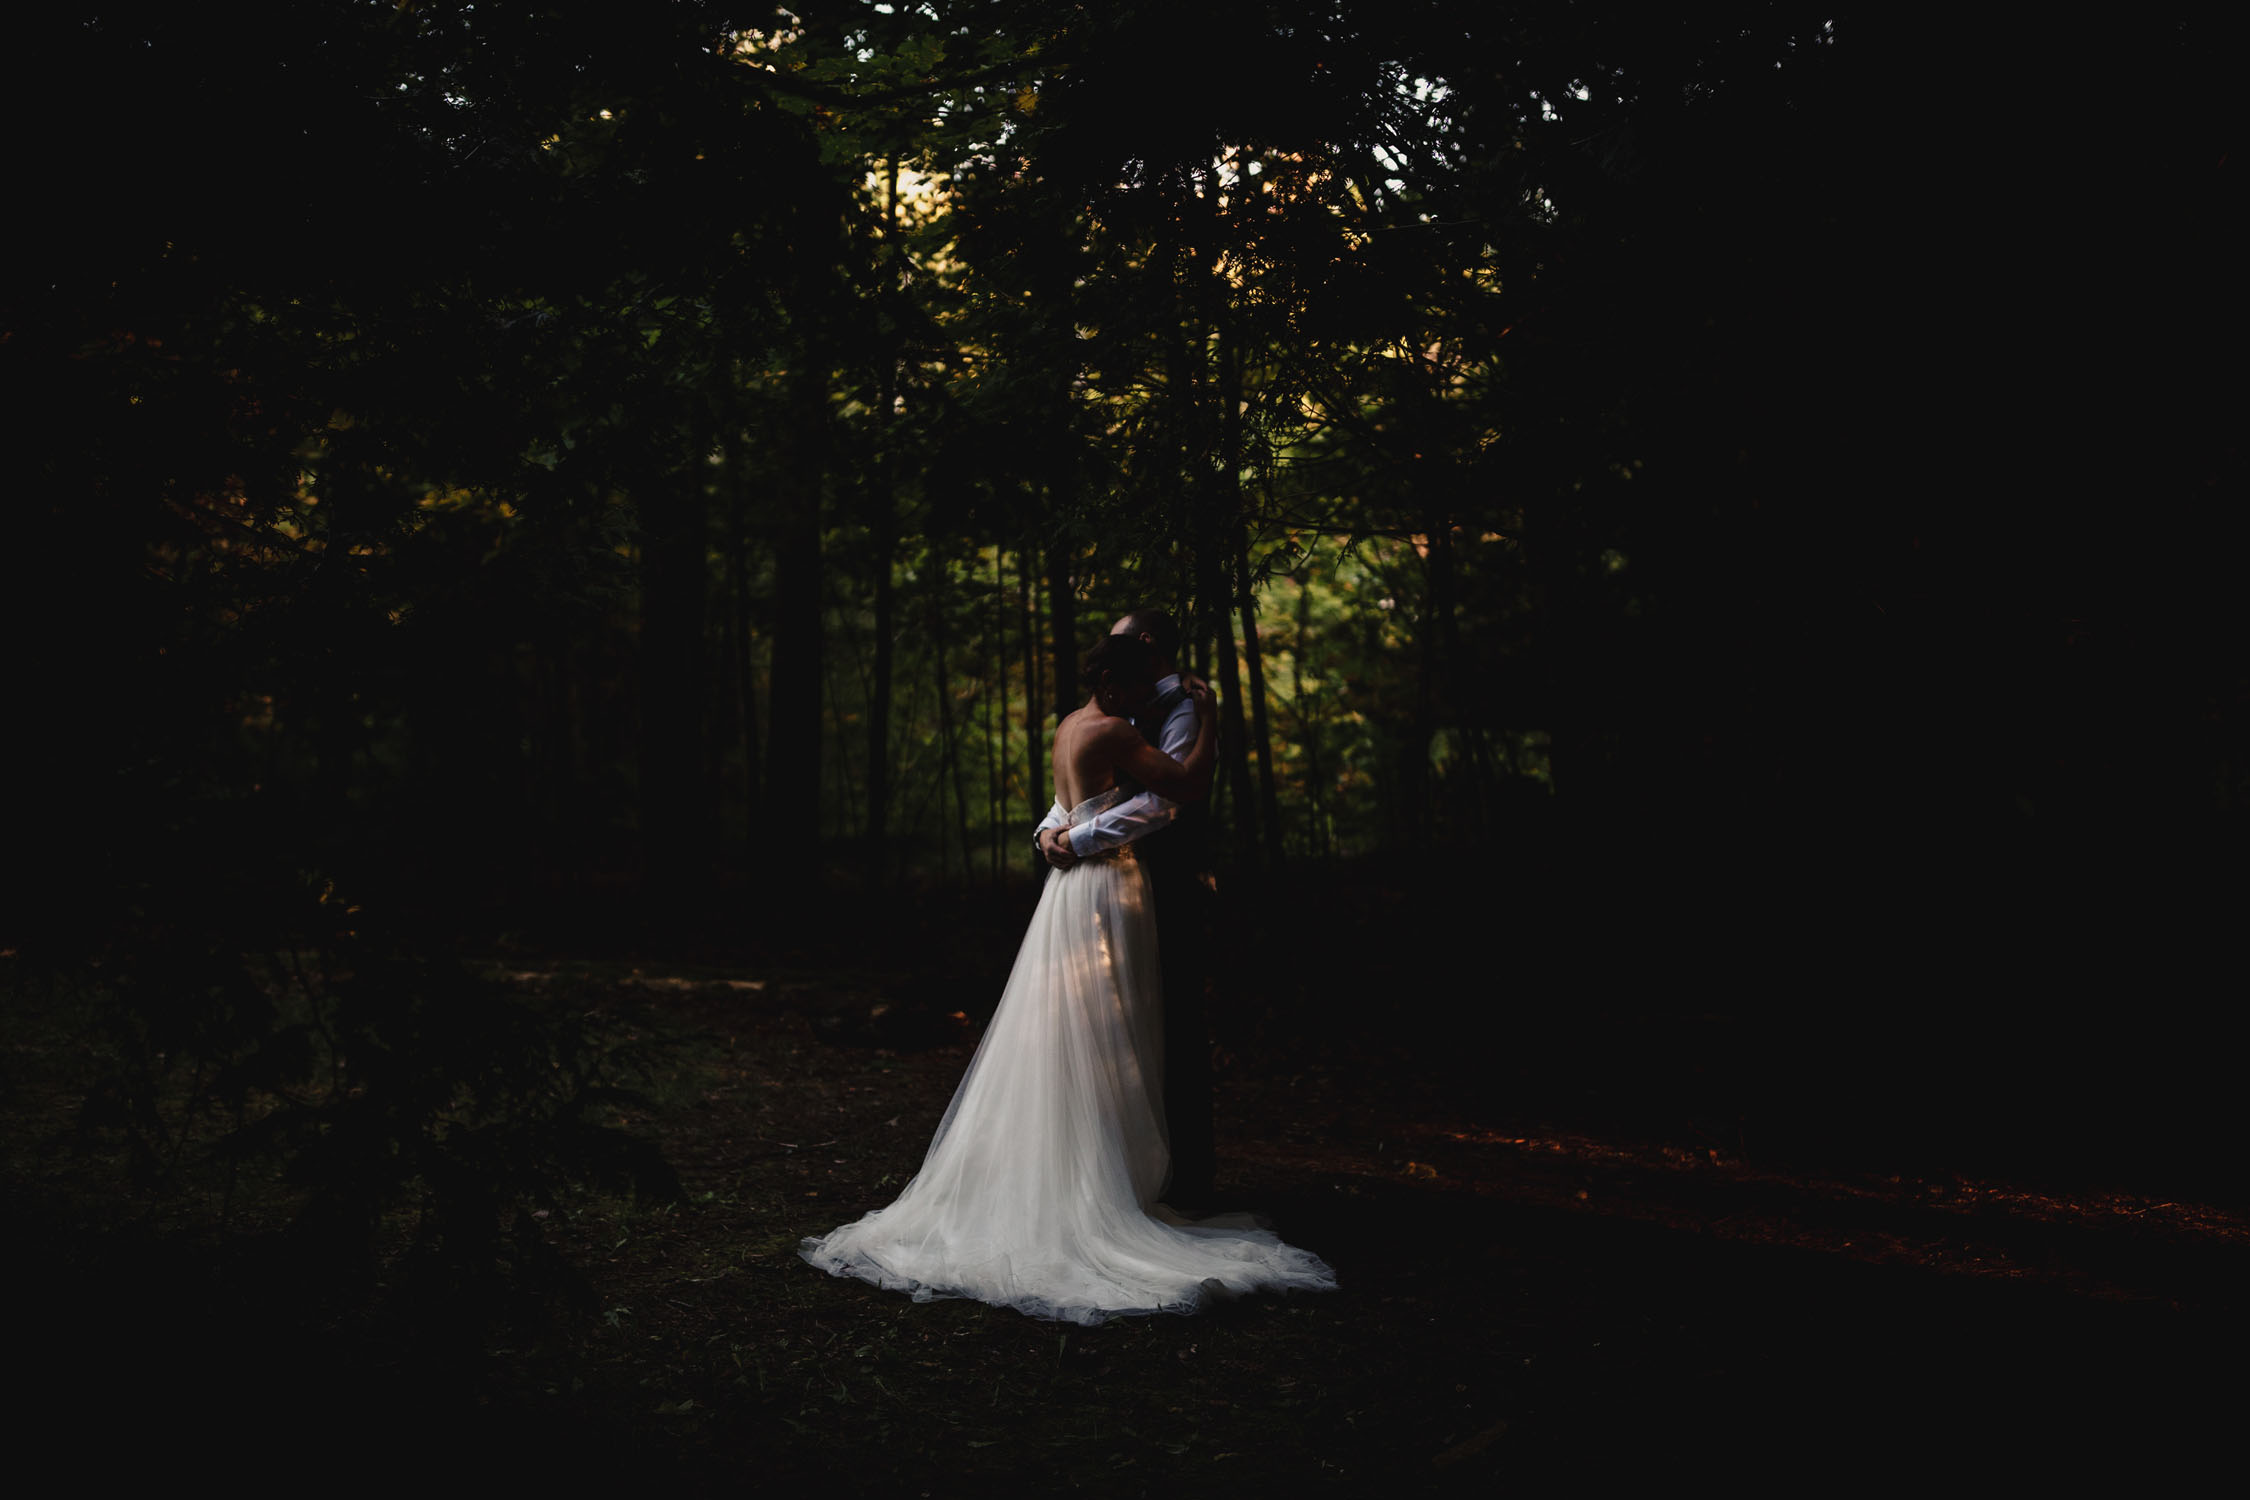 Gorgeous couple kissing off to the side in the middle of the forest.